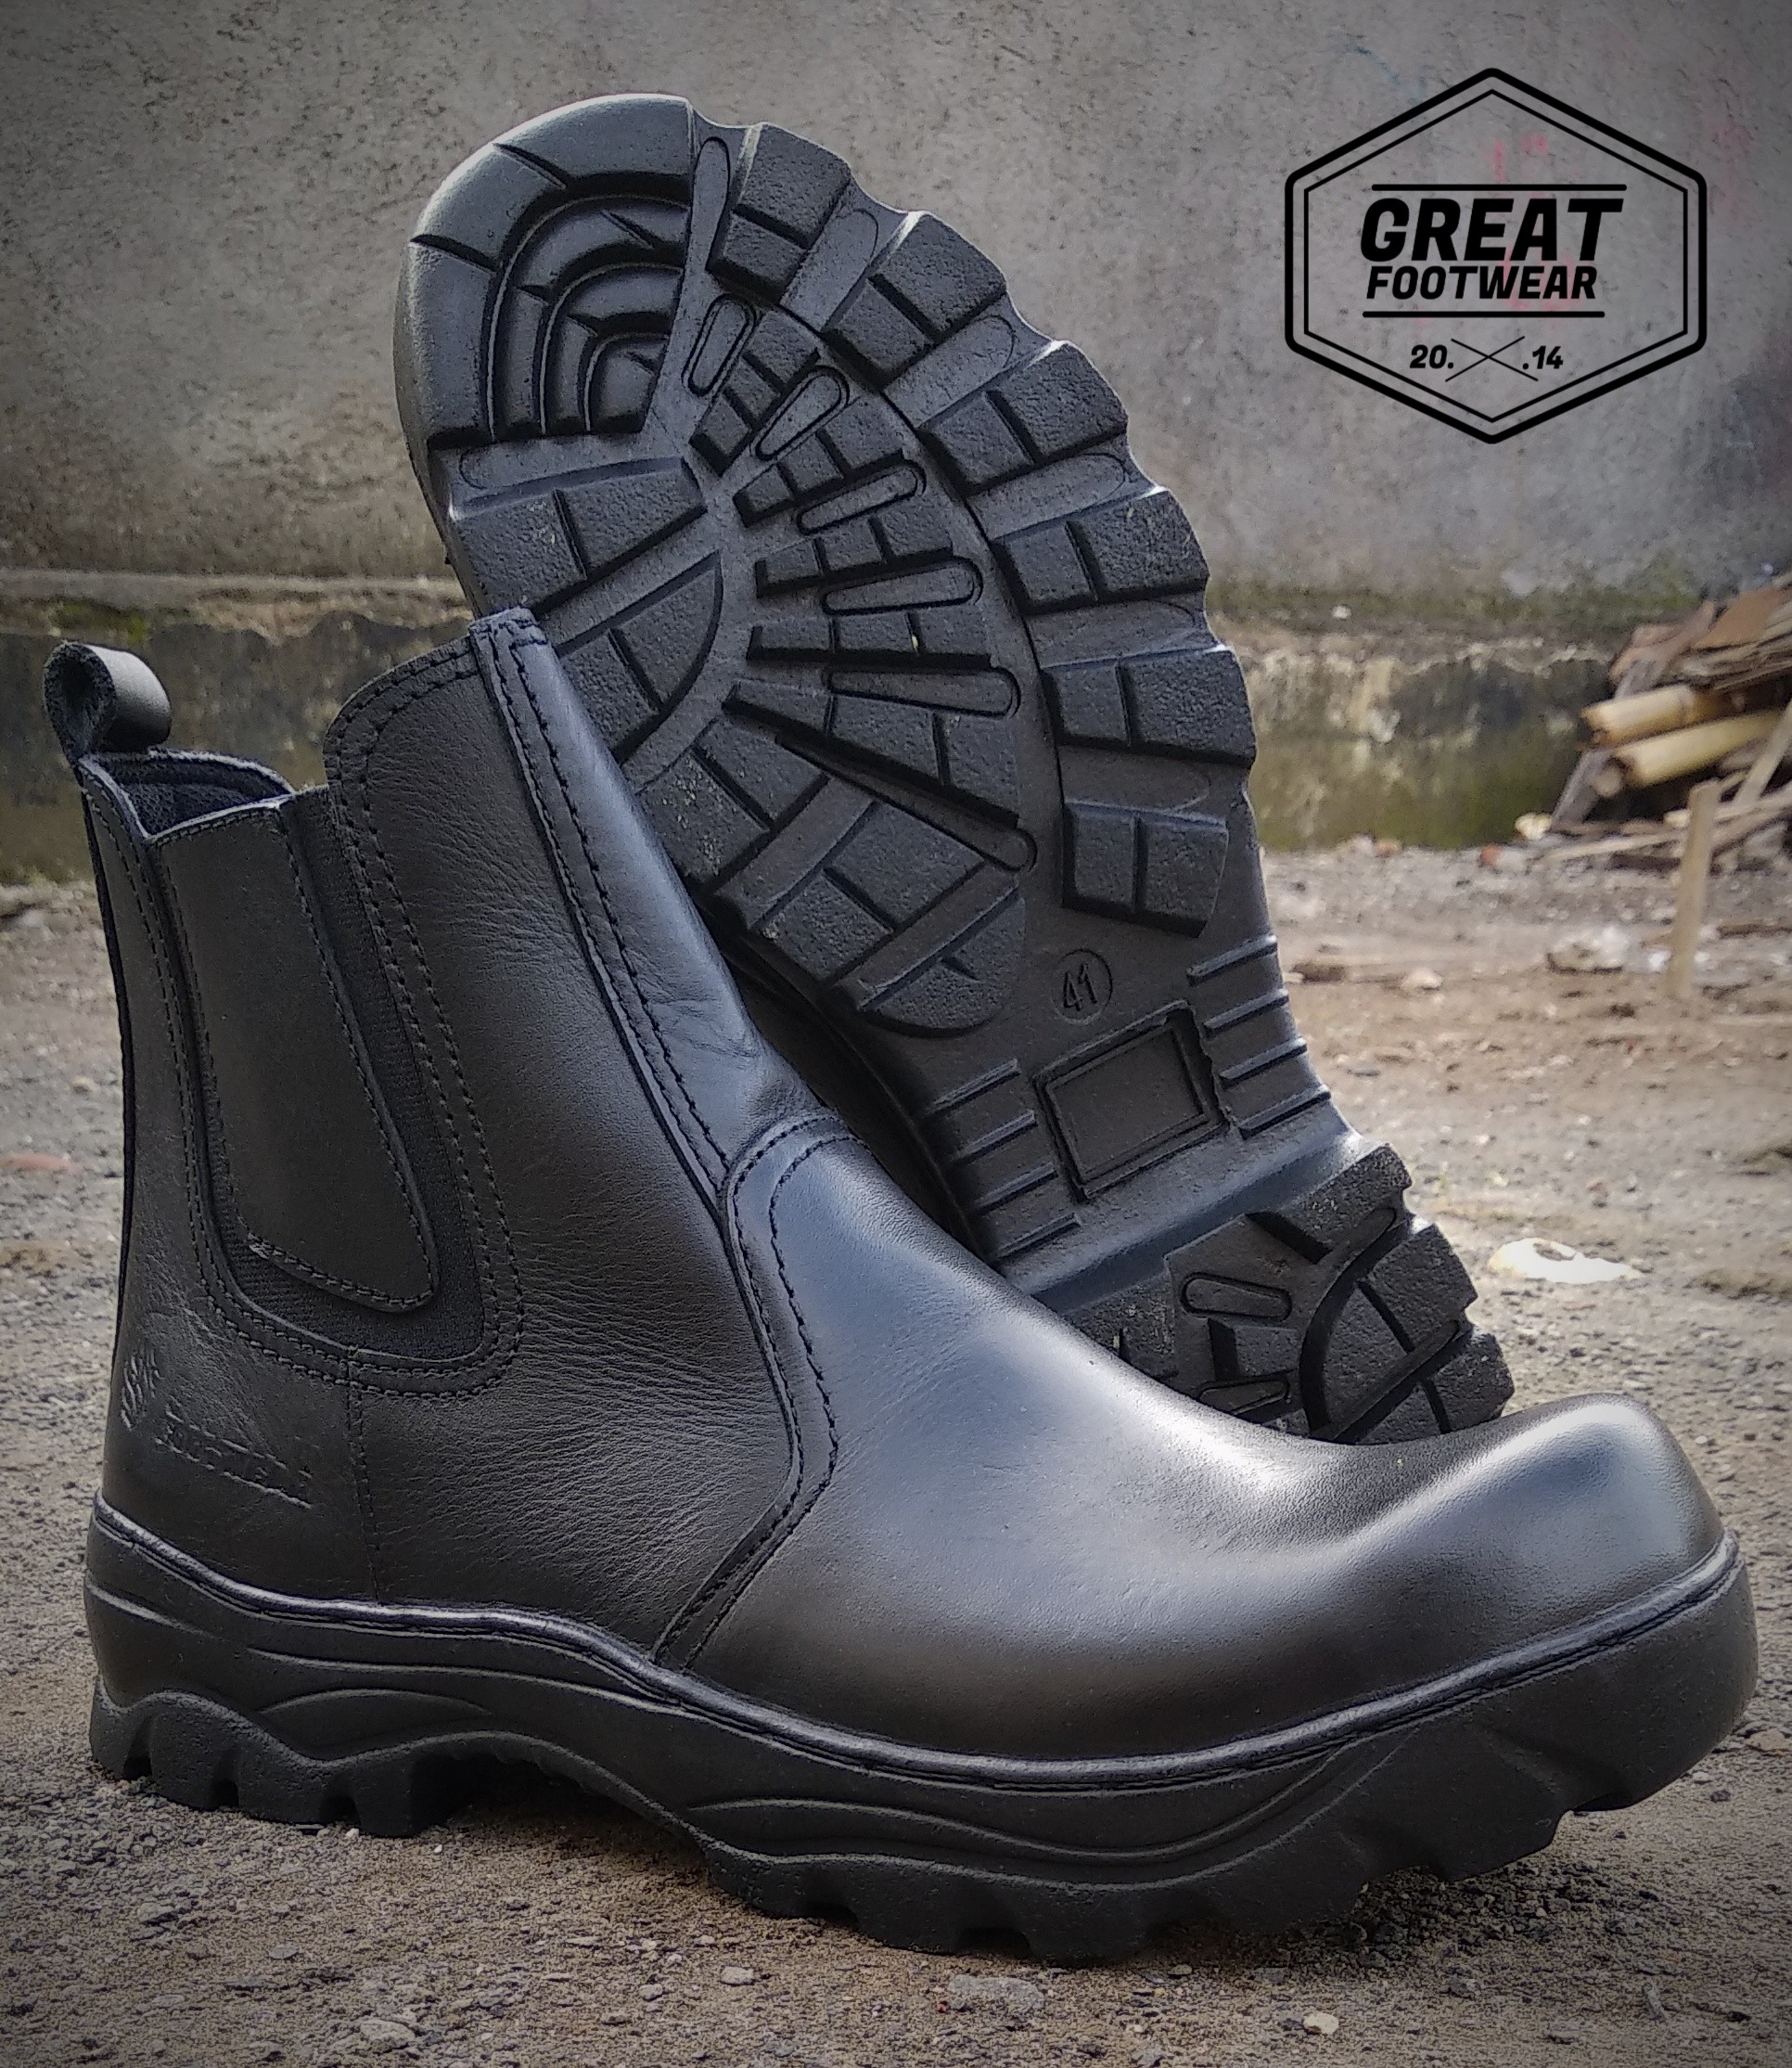 police style motorcycle boots